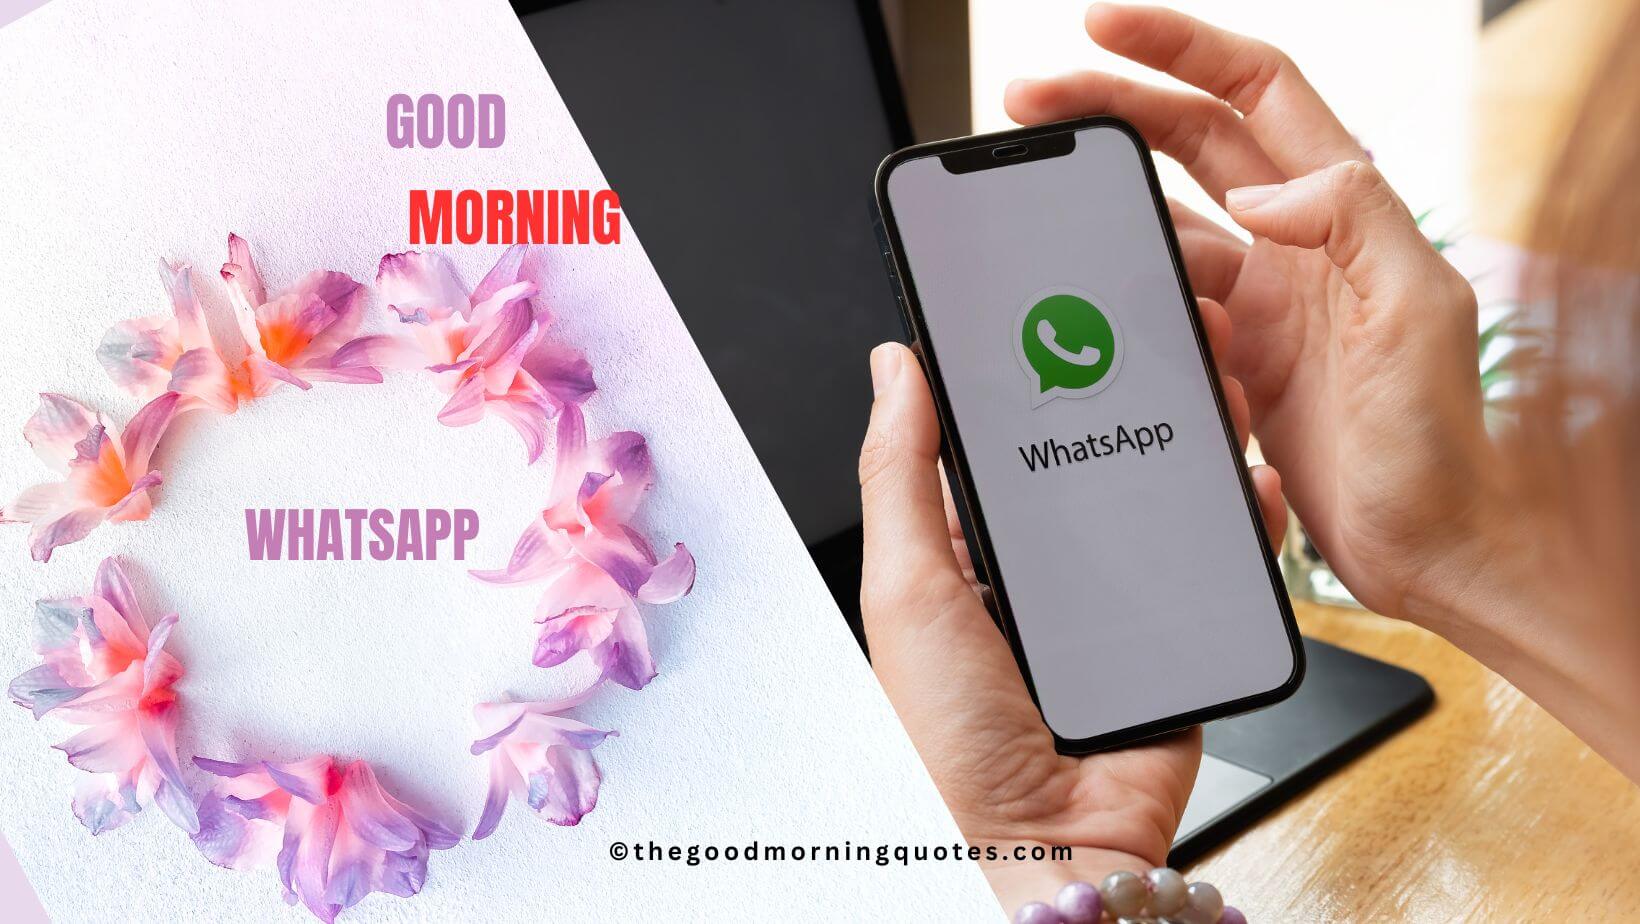 Good Morning Quotes in Hindi for WhatsApp